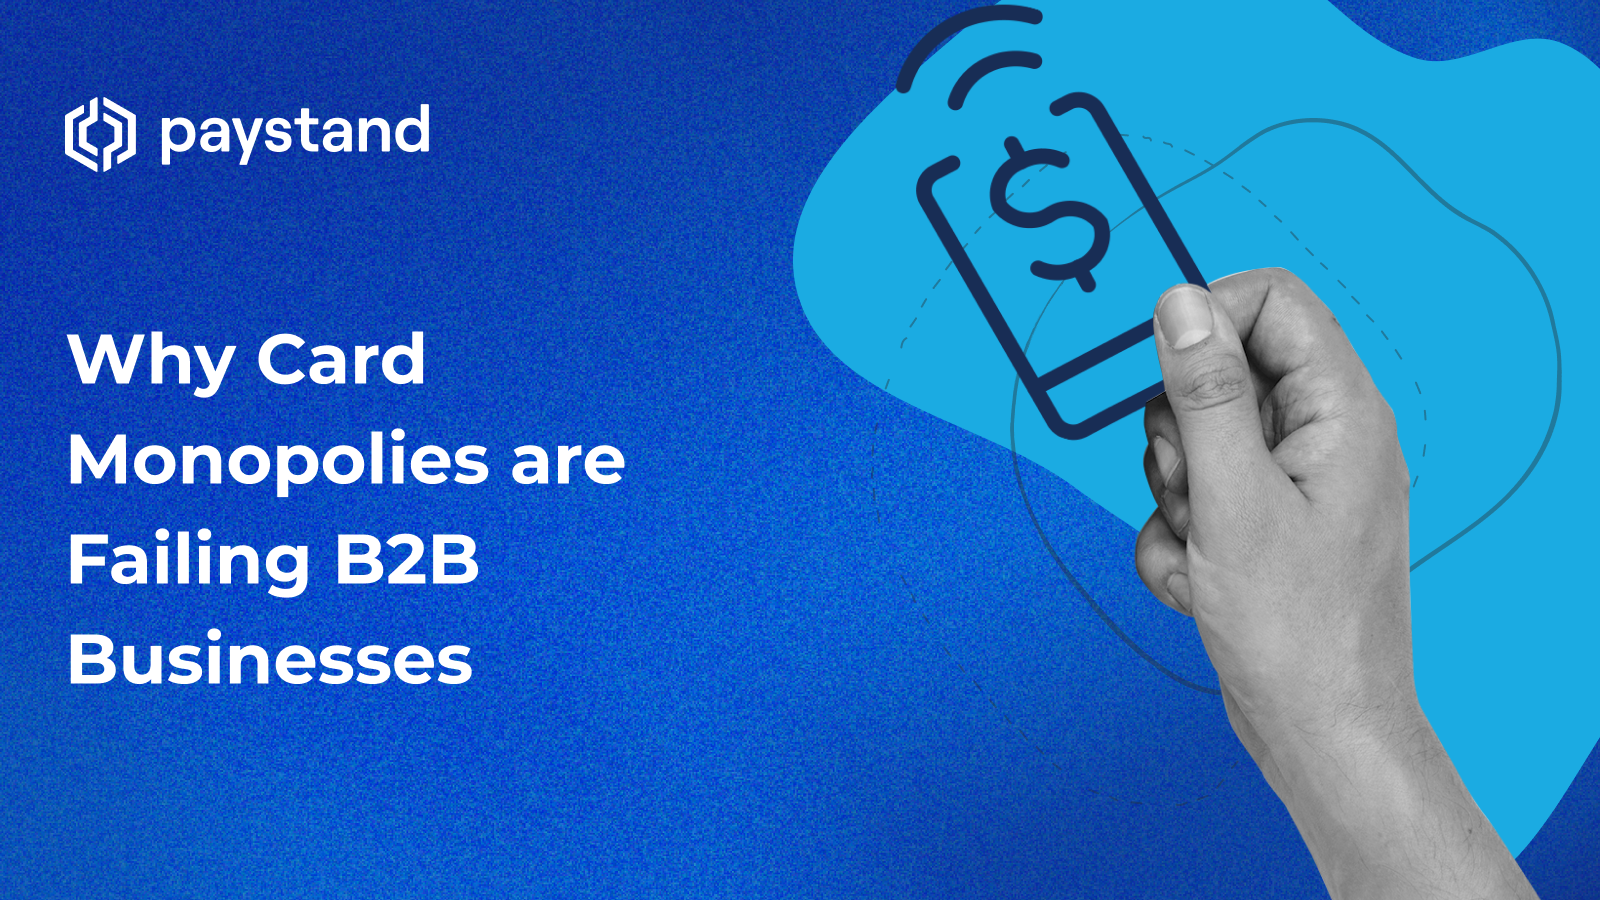 Why Card Monopolies are Failing B2B Businesses